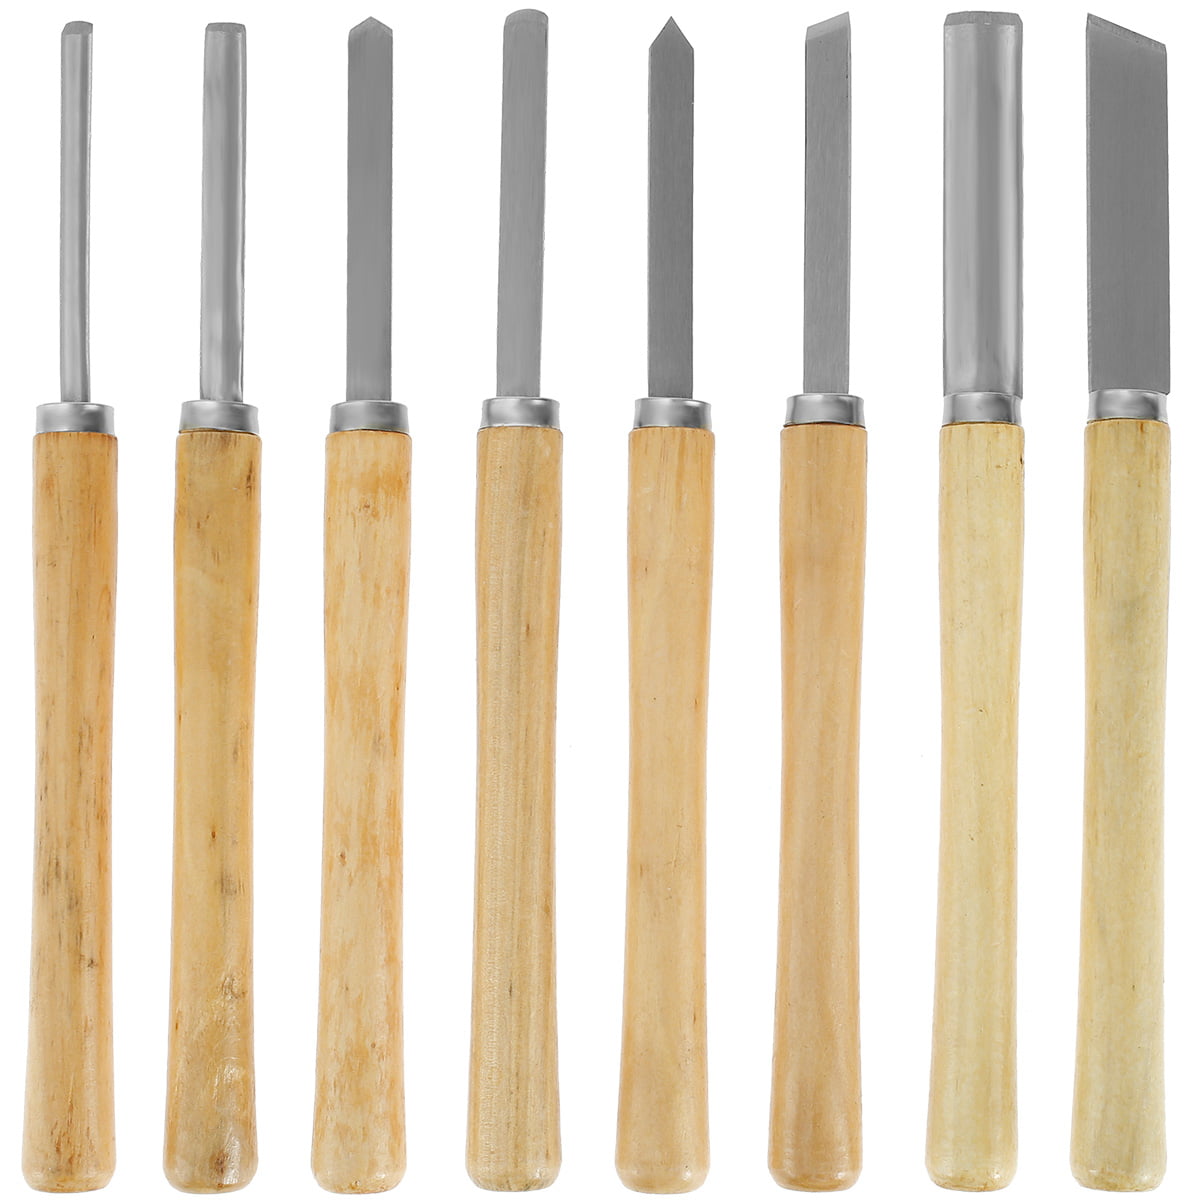 6pcs Wood Carving Knives Set Woodworking Hand Tool Whittling Spoon Wax Carpenter 